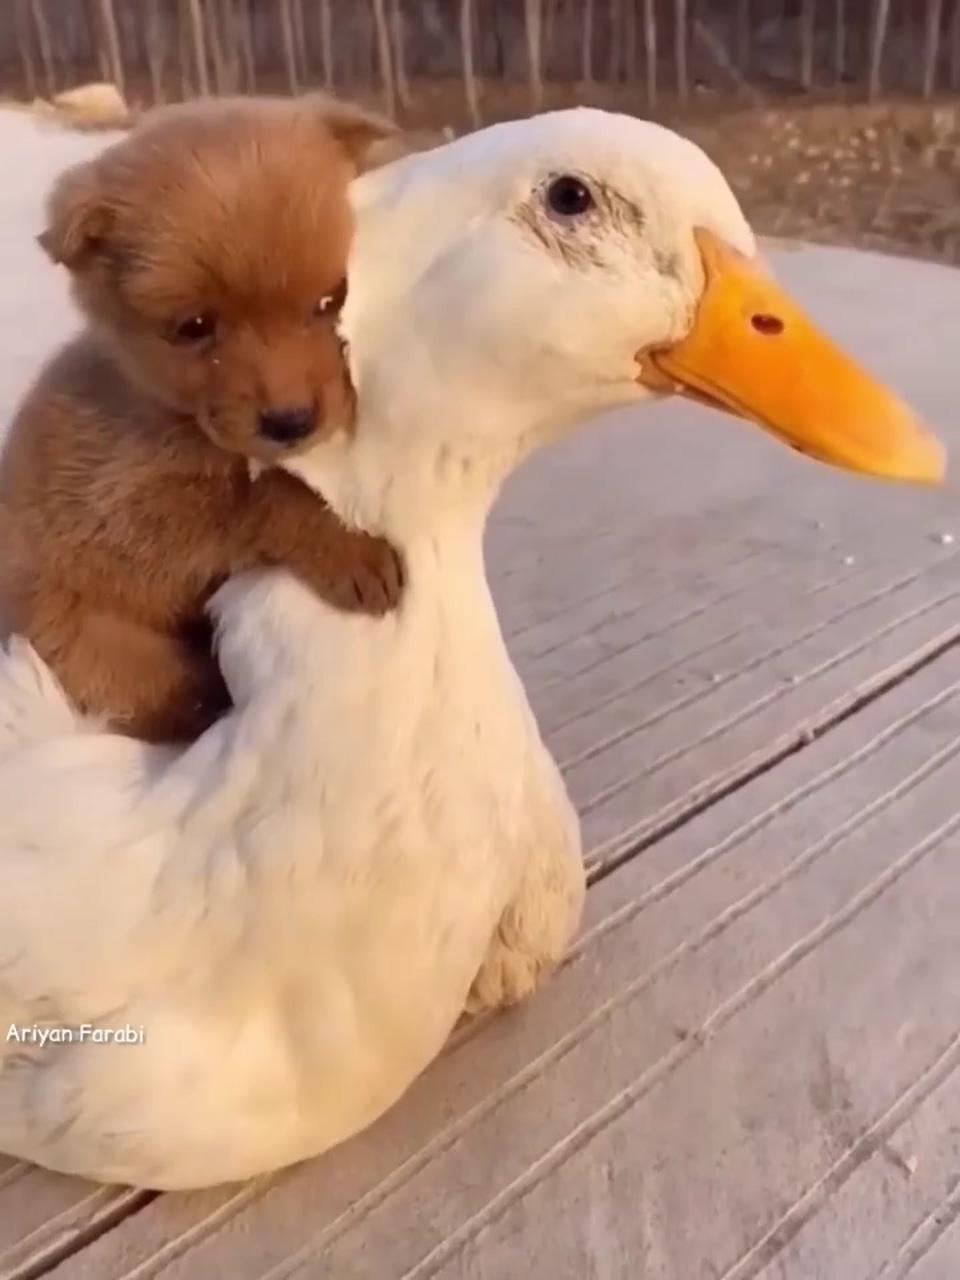 This adorable puppy has a new best friend; really cute puppies